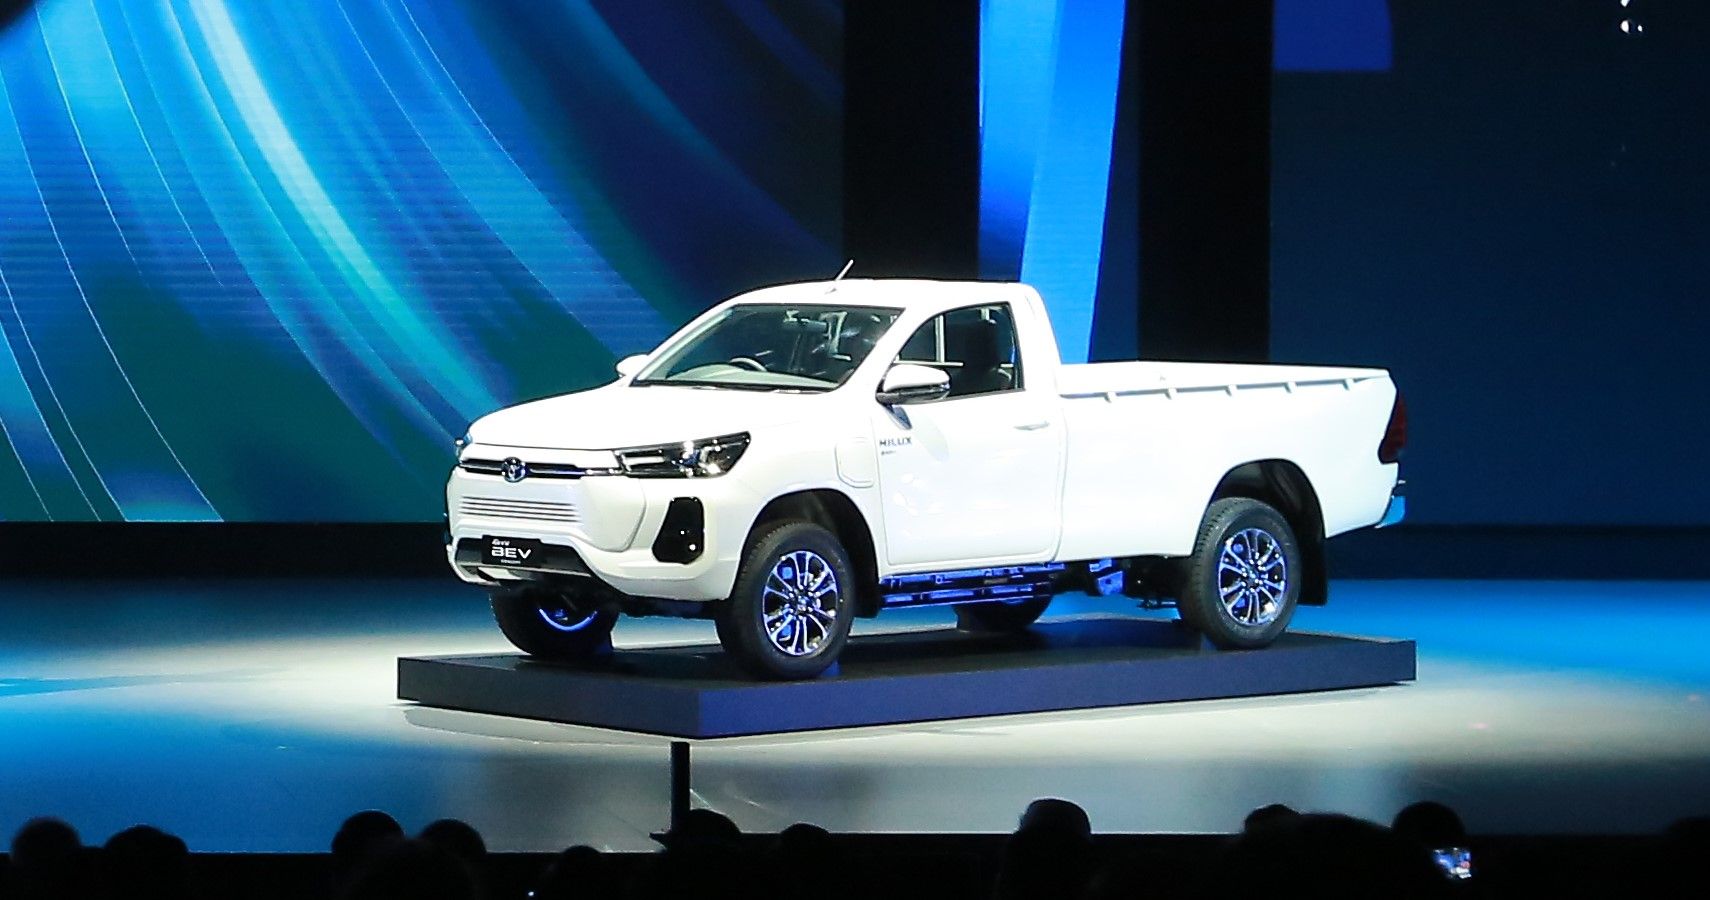 Toyota Hilux BEV Concept showcased at the 60th Anniversary celebration